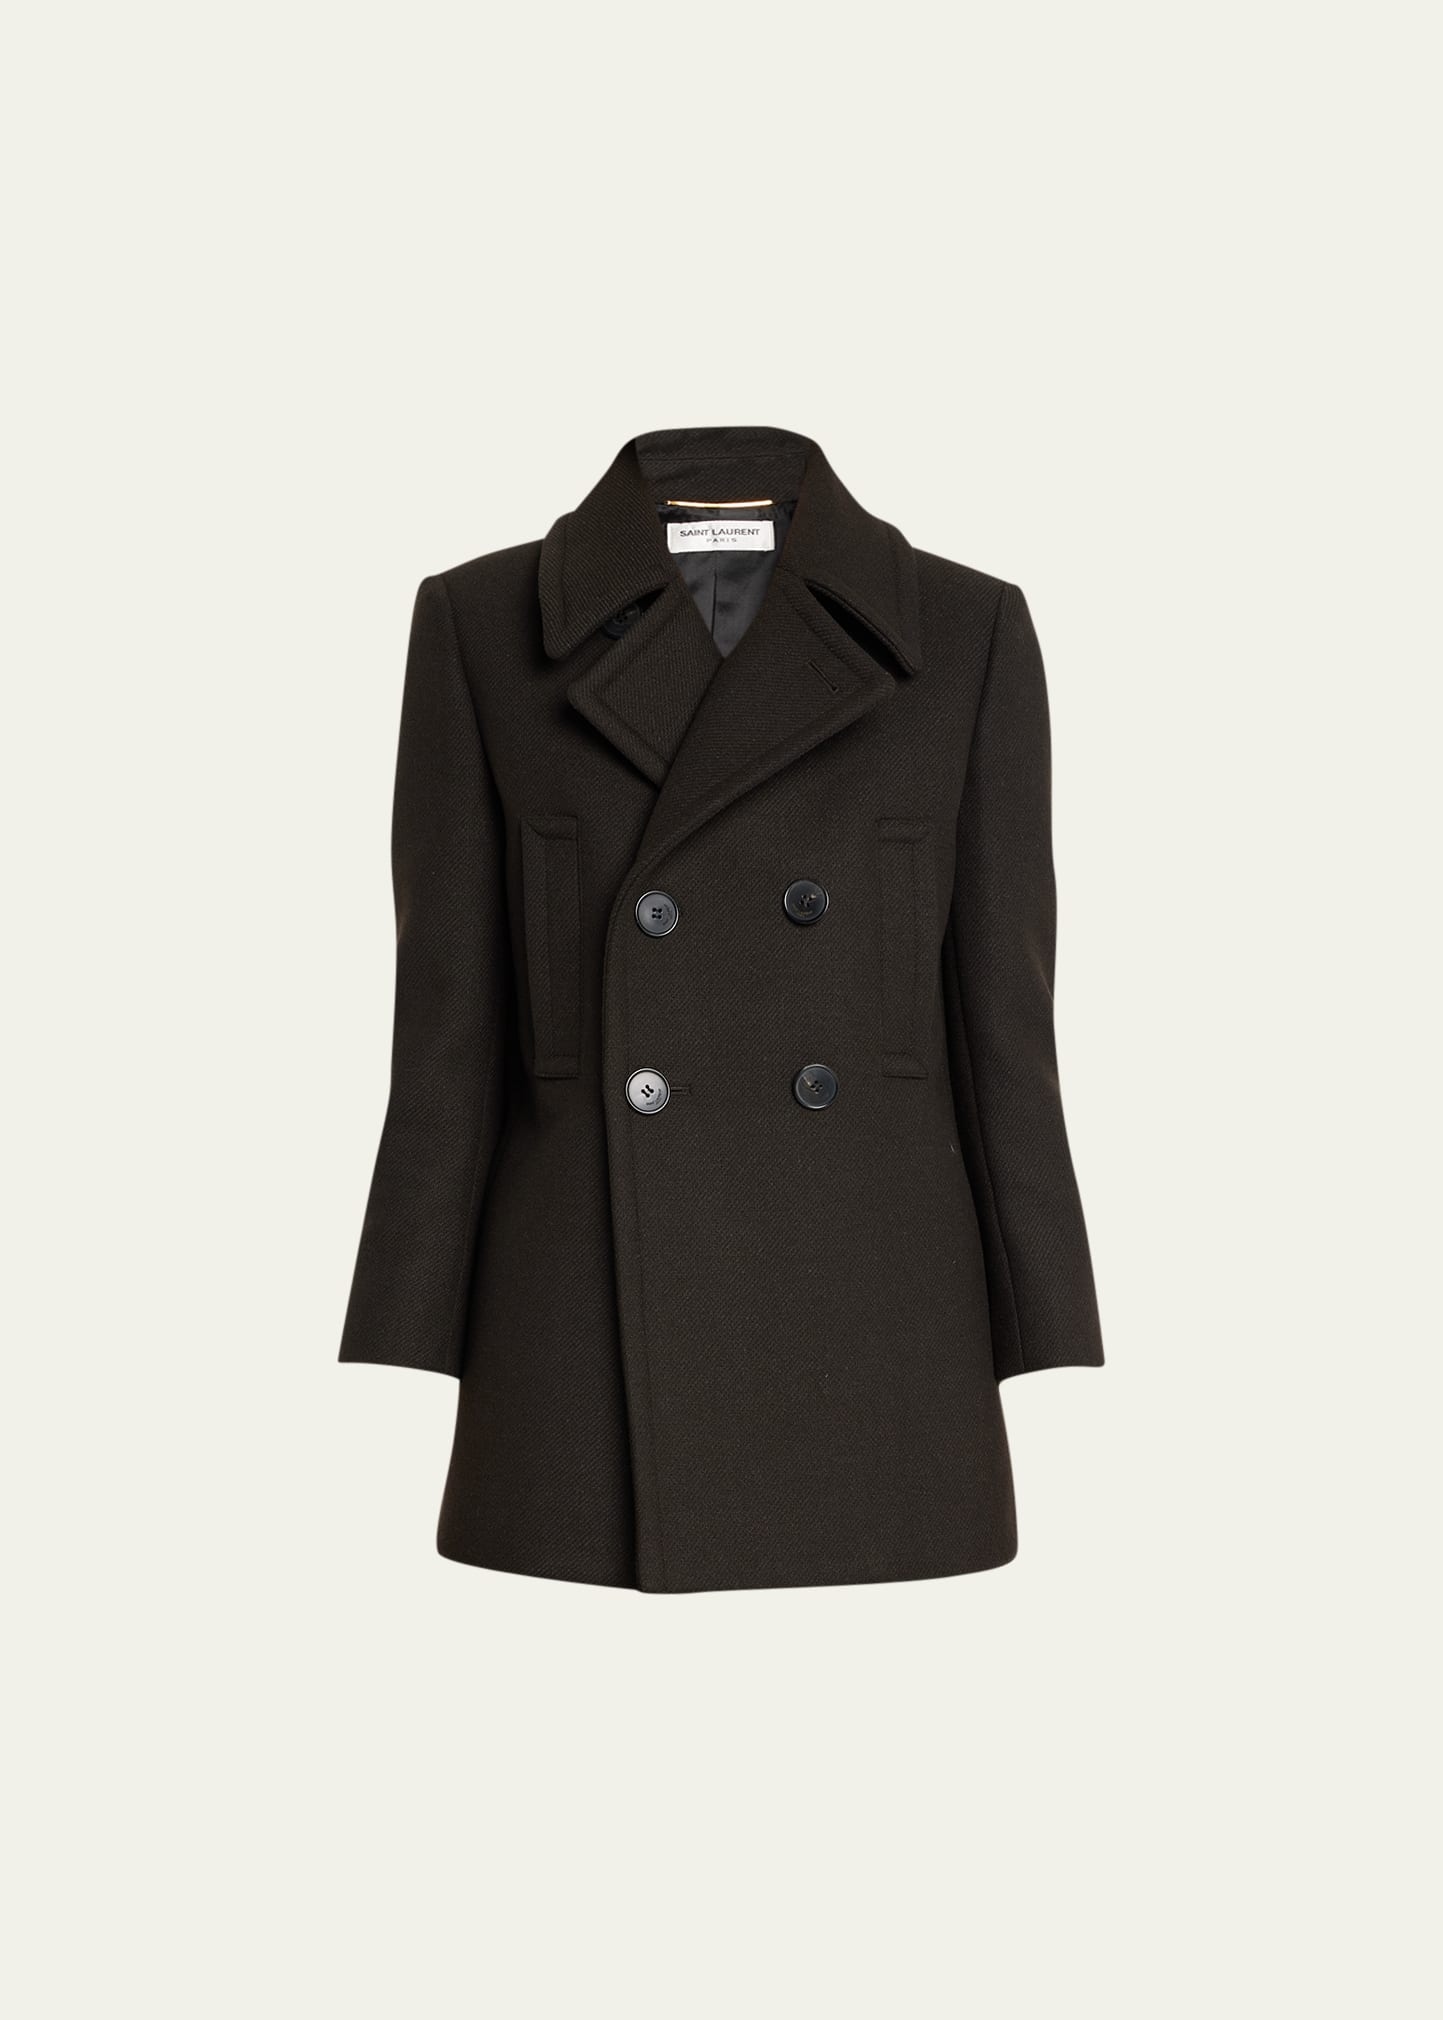 Double-Breasted Wool Pea Coat